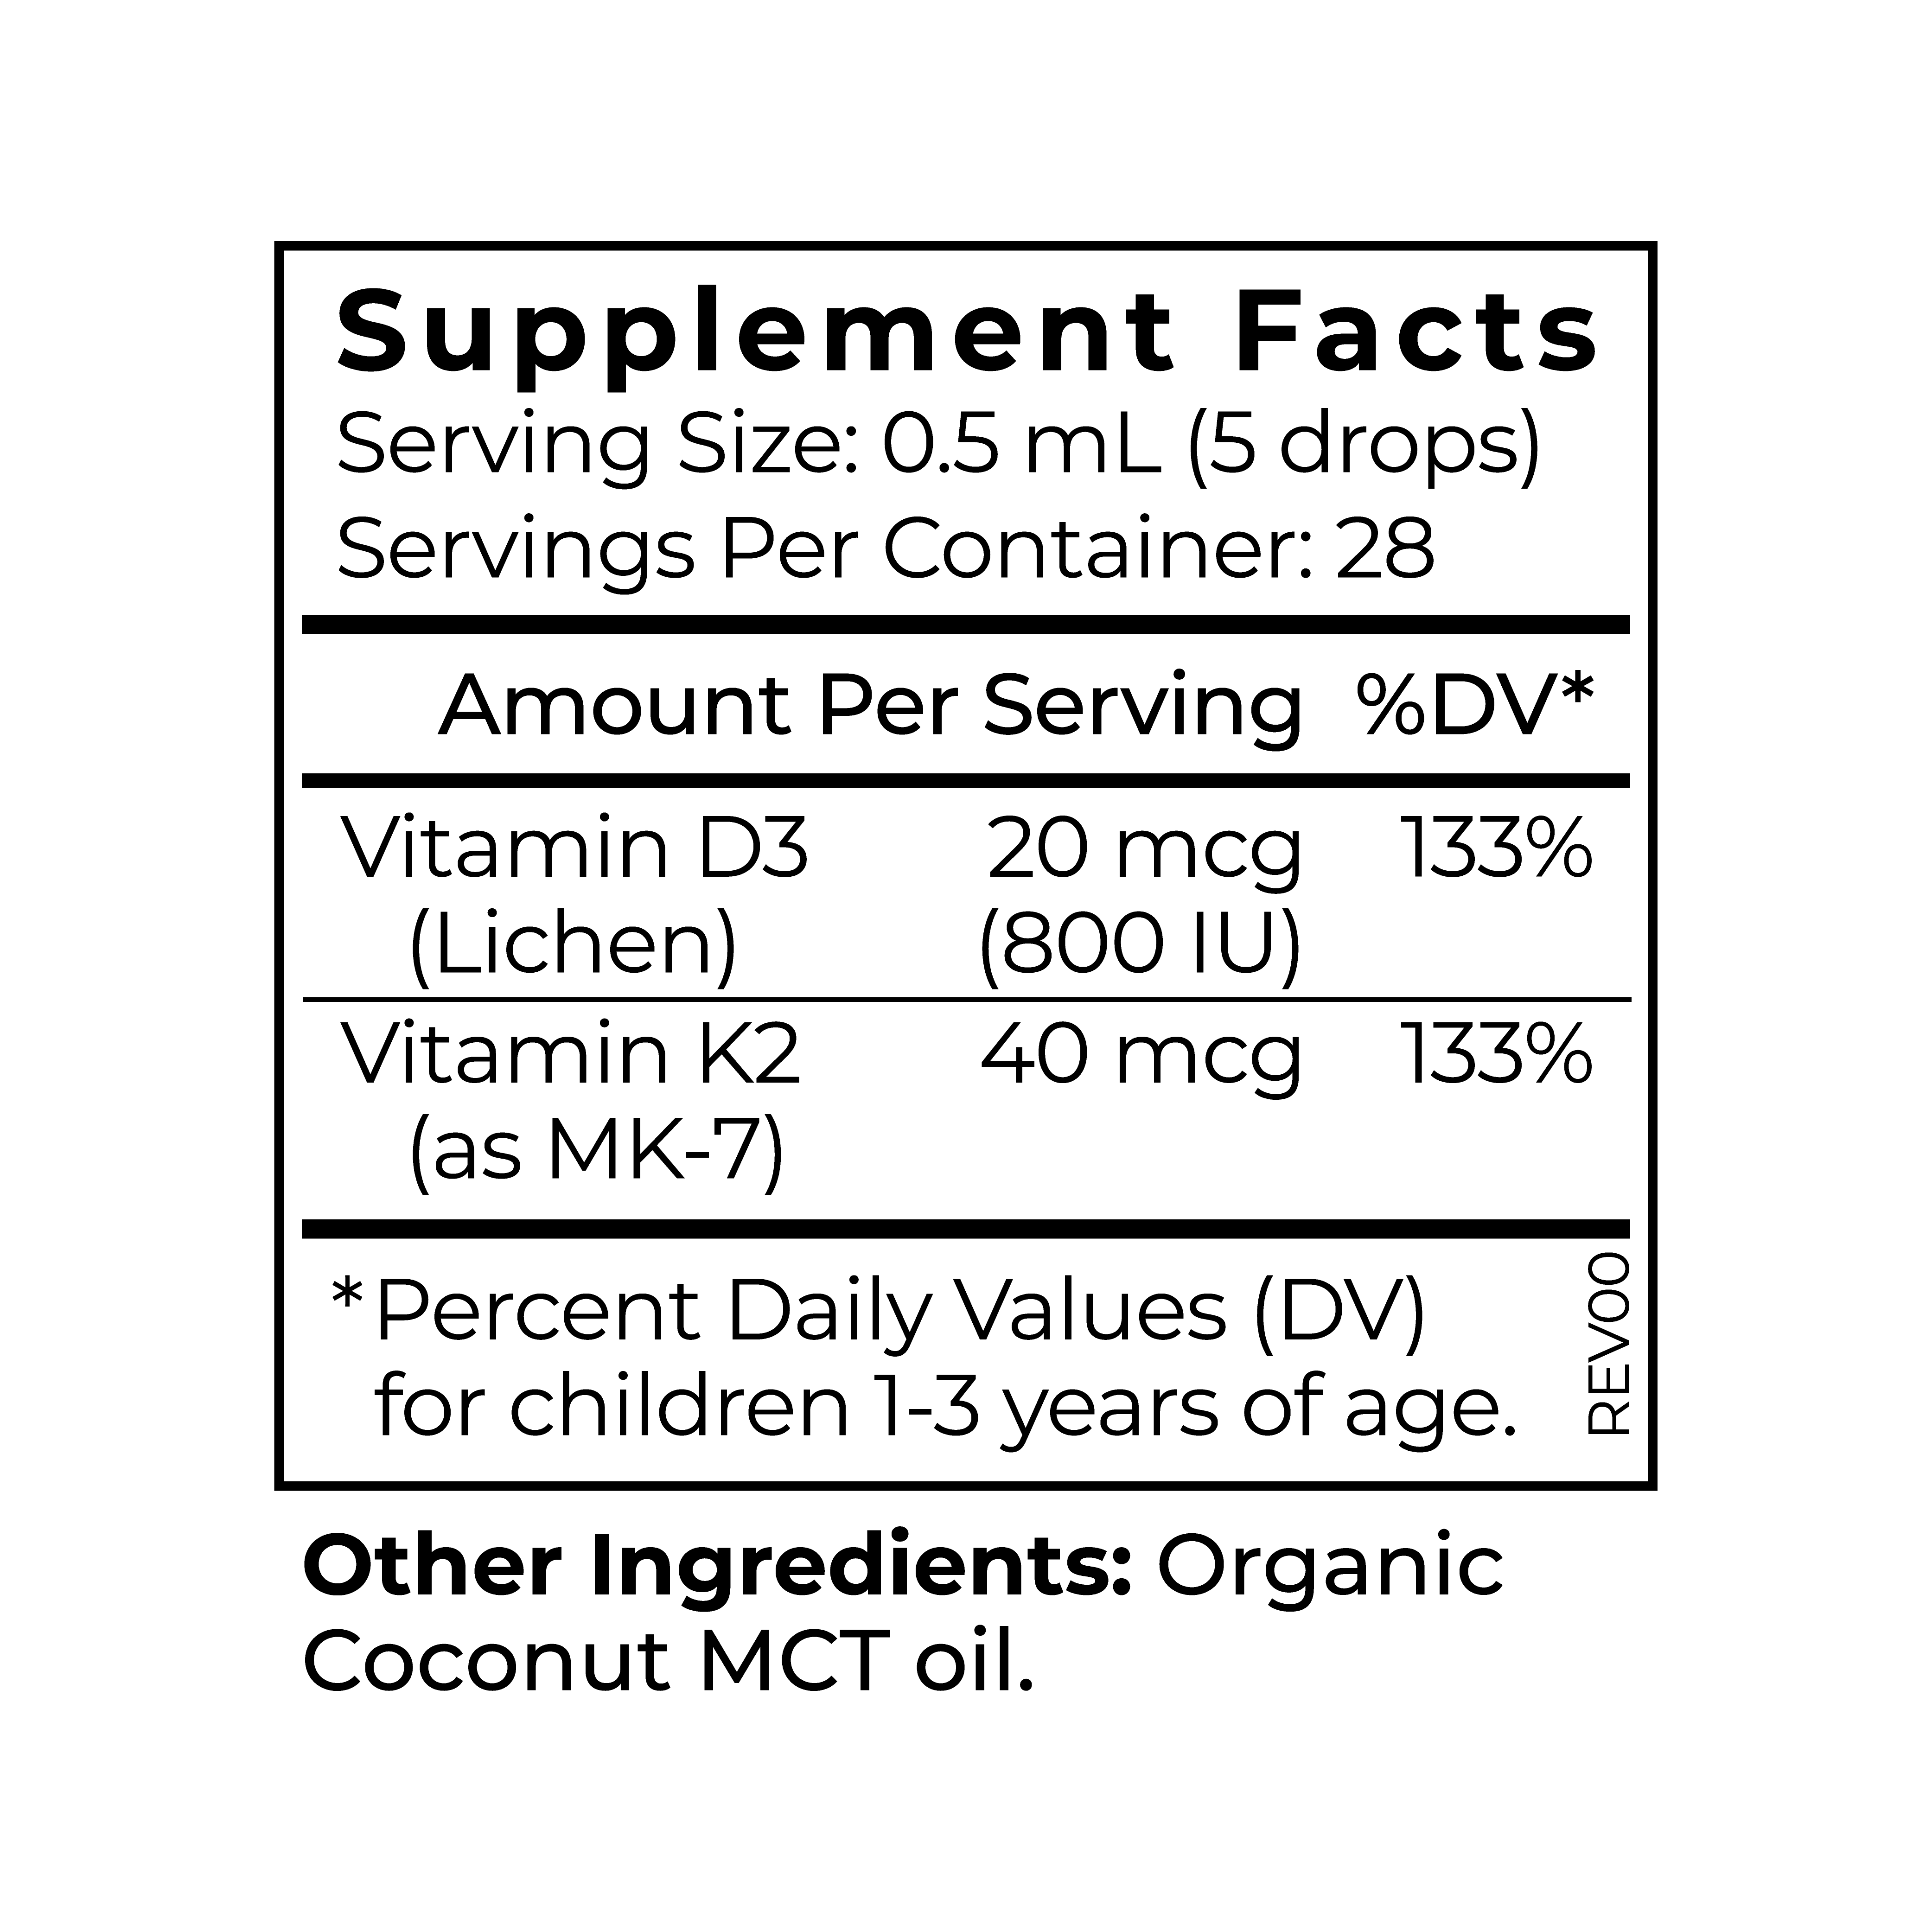 Cymbiotika® Kids Toddler D3+K2 Bottle and Box Supplement Facts Panel